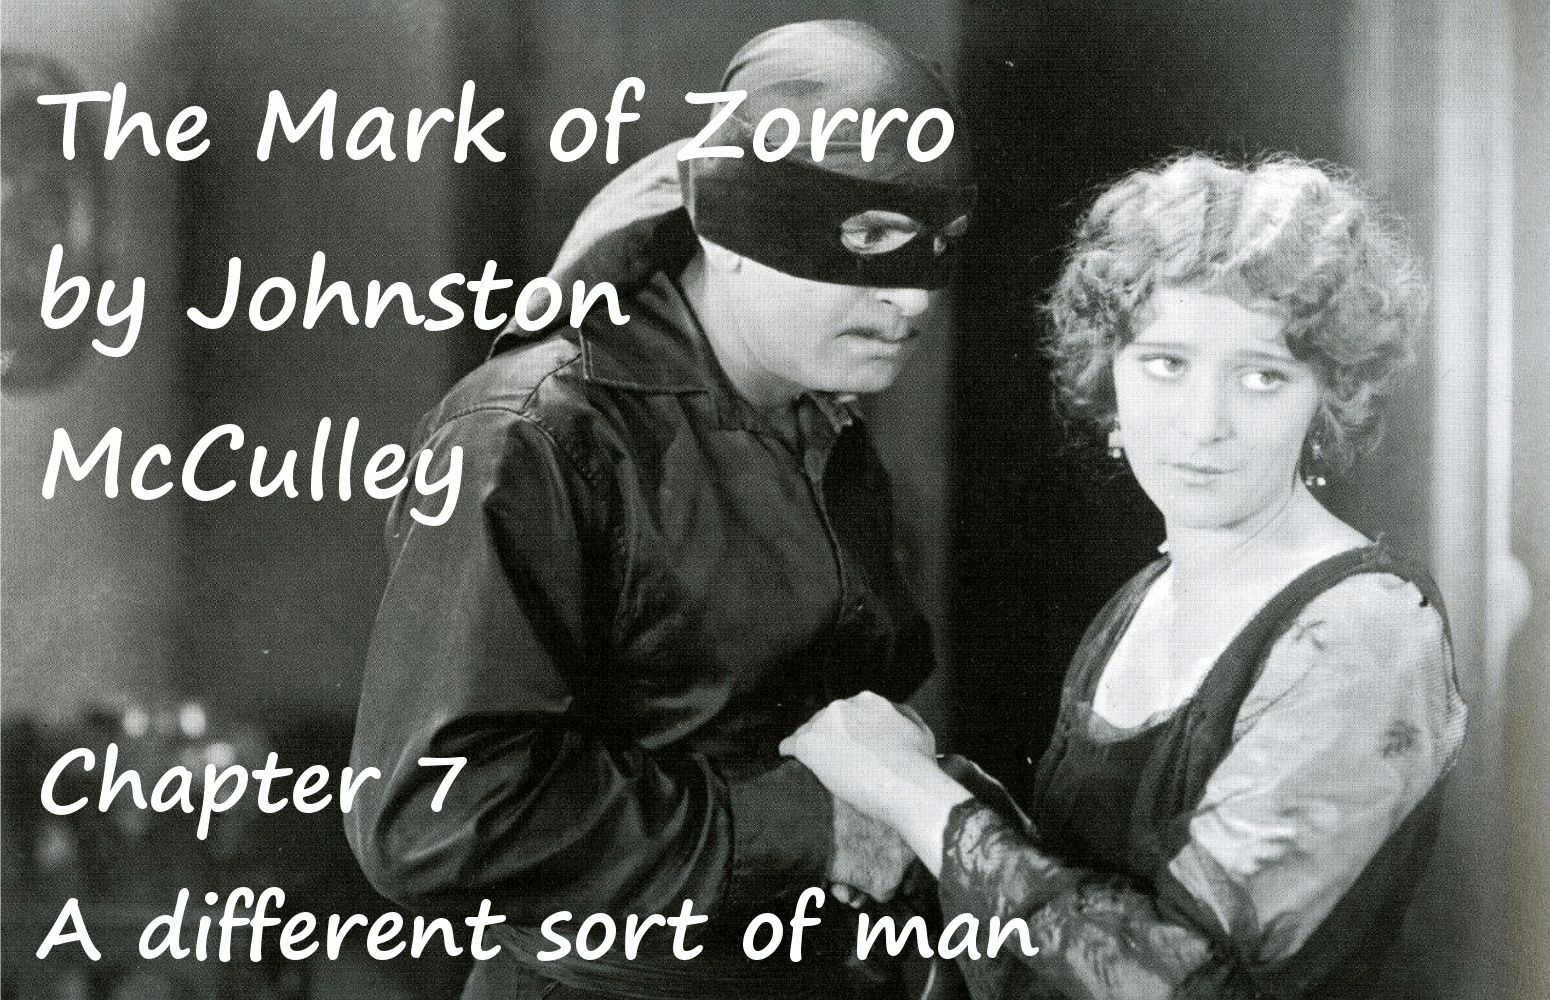 The Mark of Zorro chapter 7 A different sort of man by Johnston McCulley